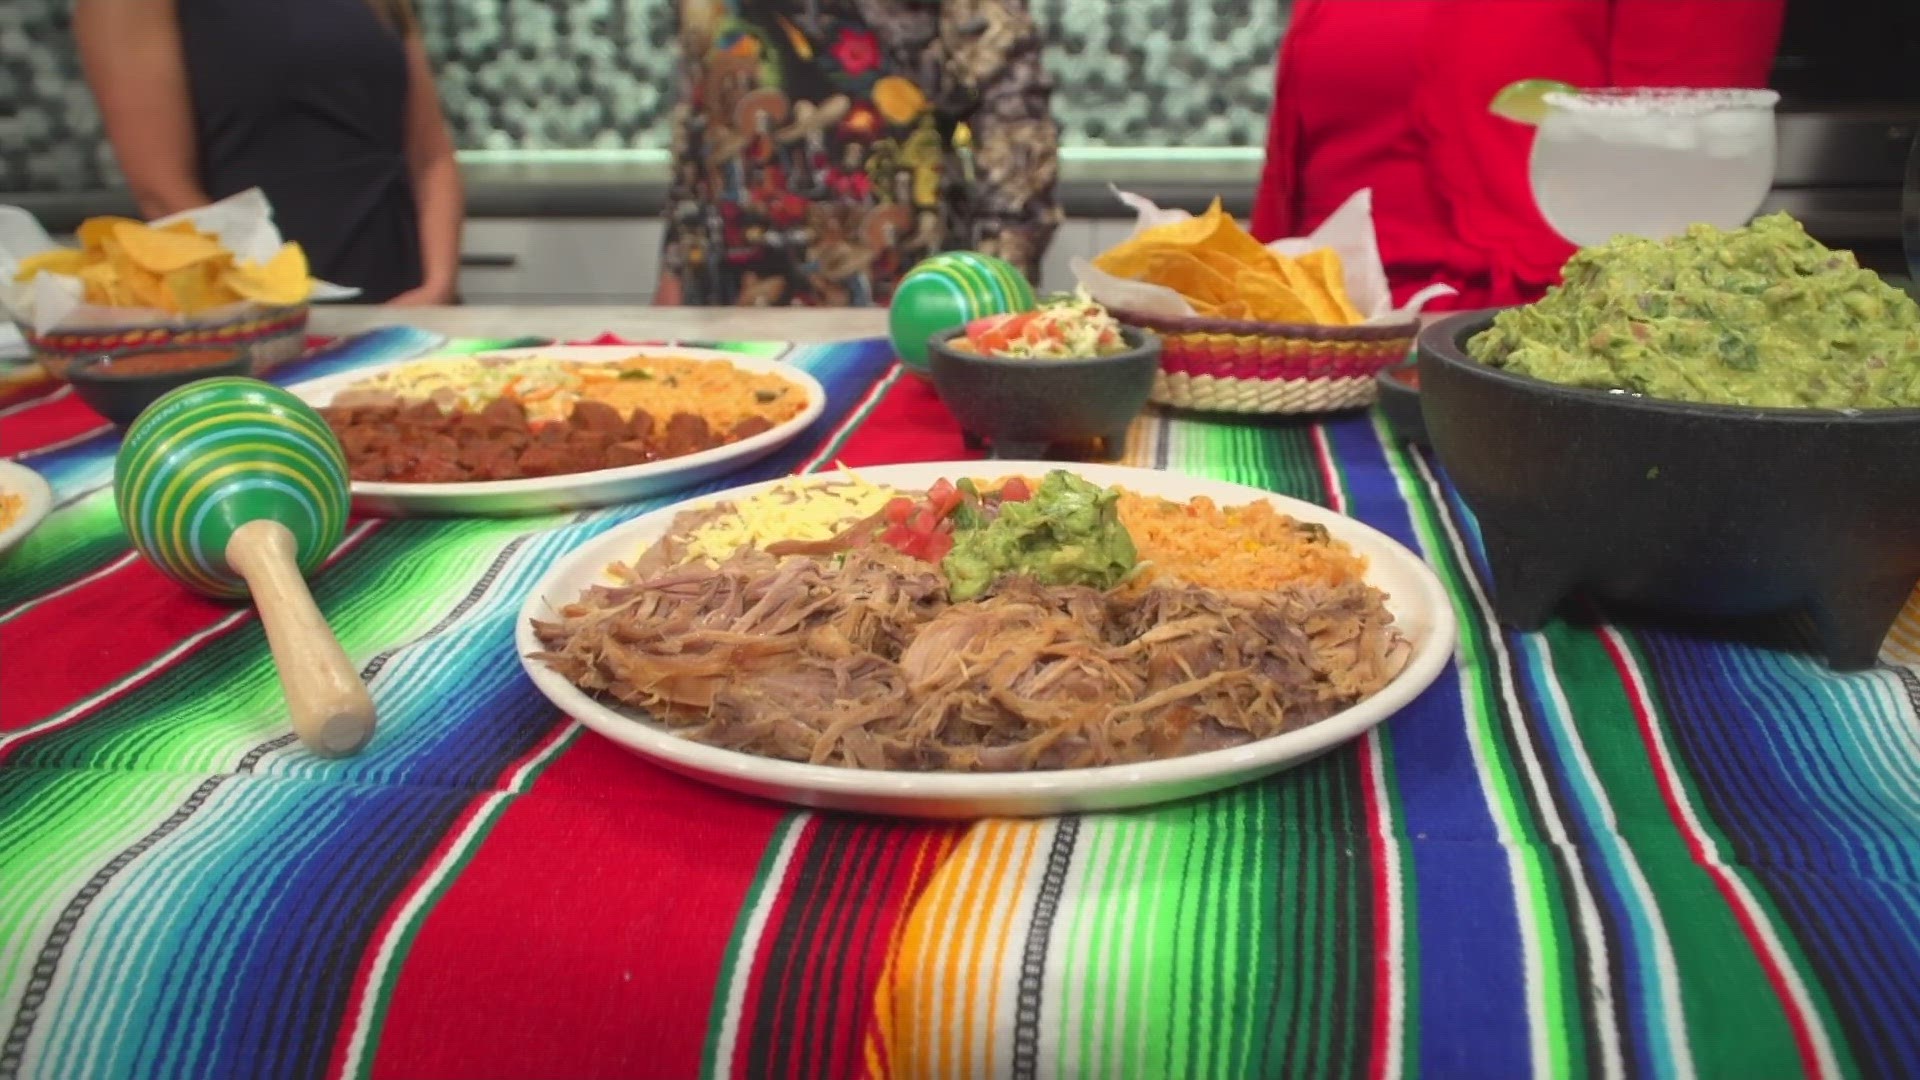 The owners of El Tequileño Family Mexican restaurants show how they celebrate Cinco de Mayo.